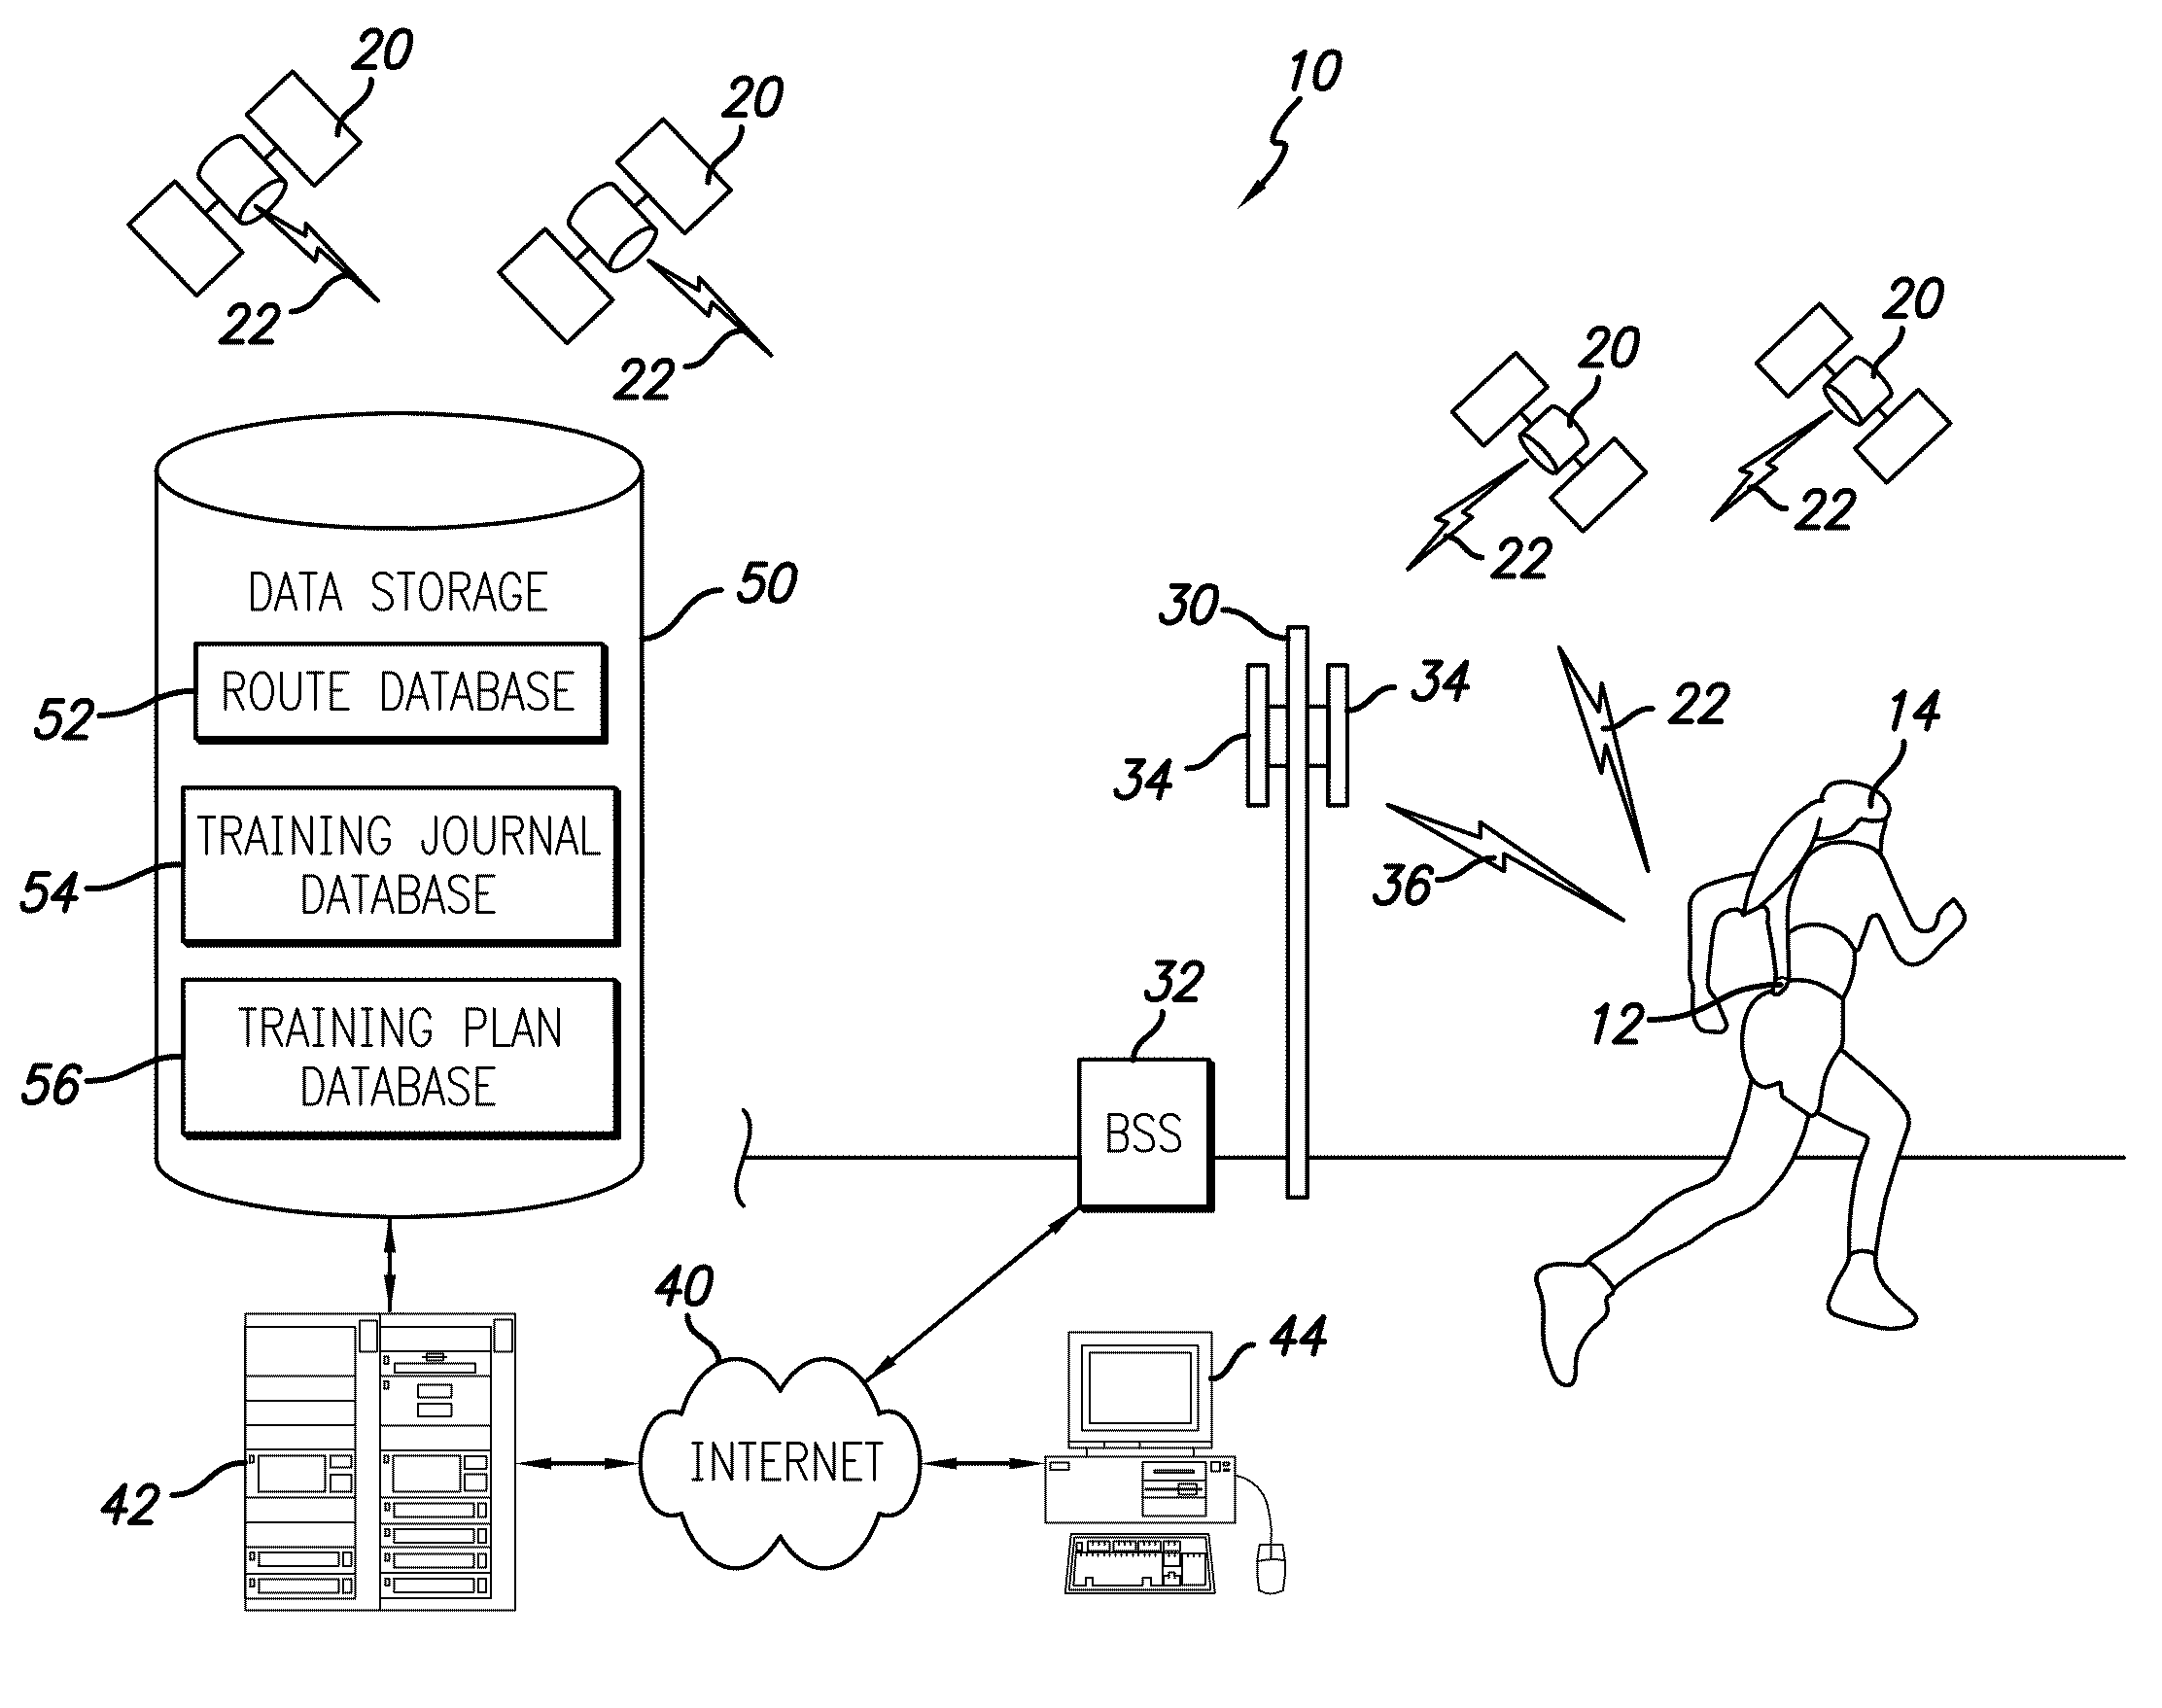 Program Products, Methods, and Systems for Providing Location-Aware Fitness Monitoring Services